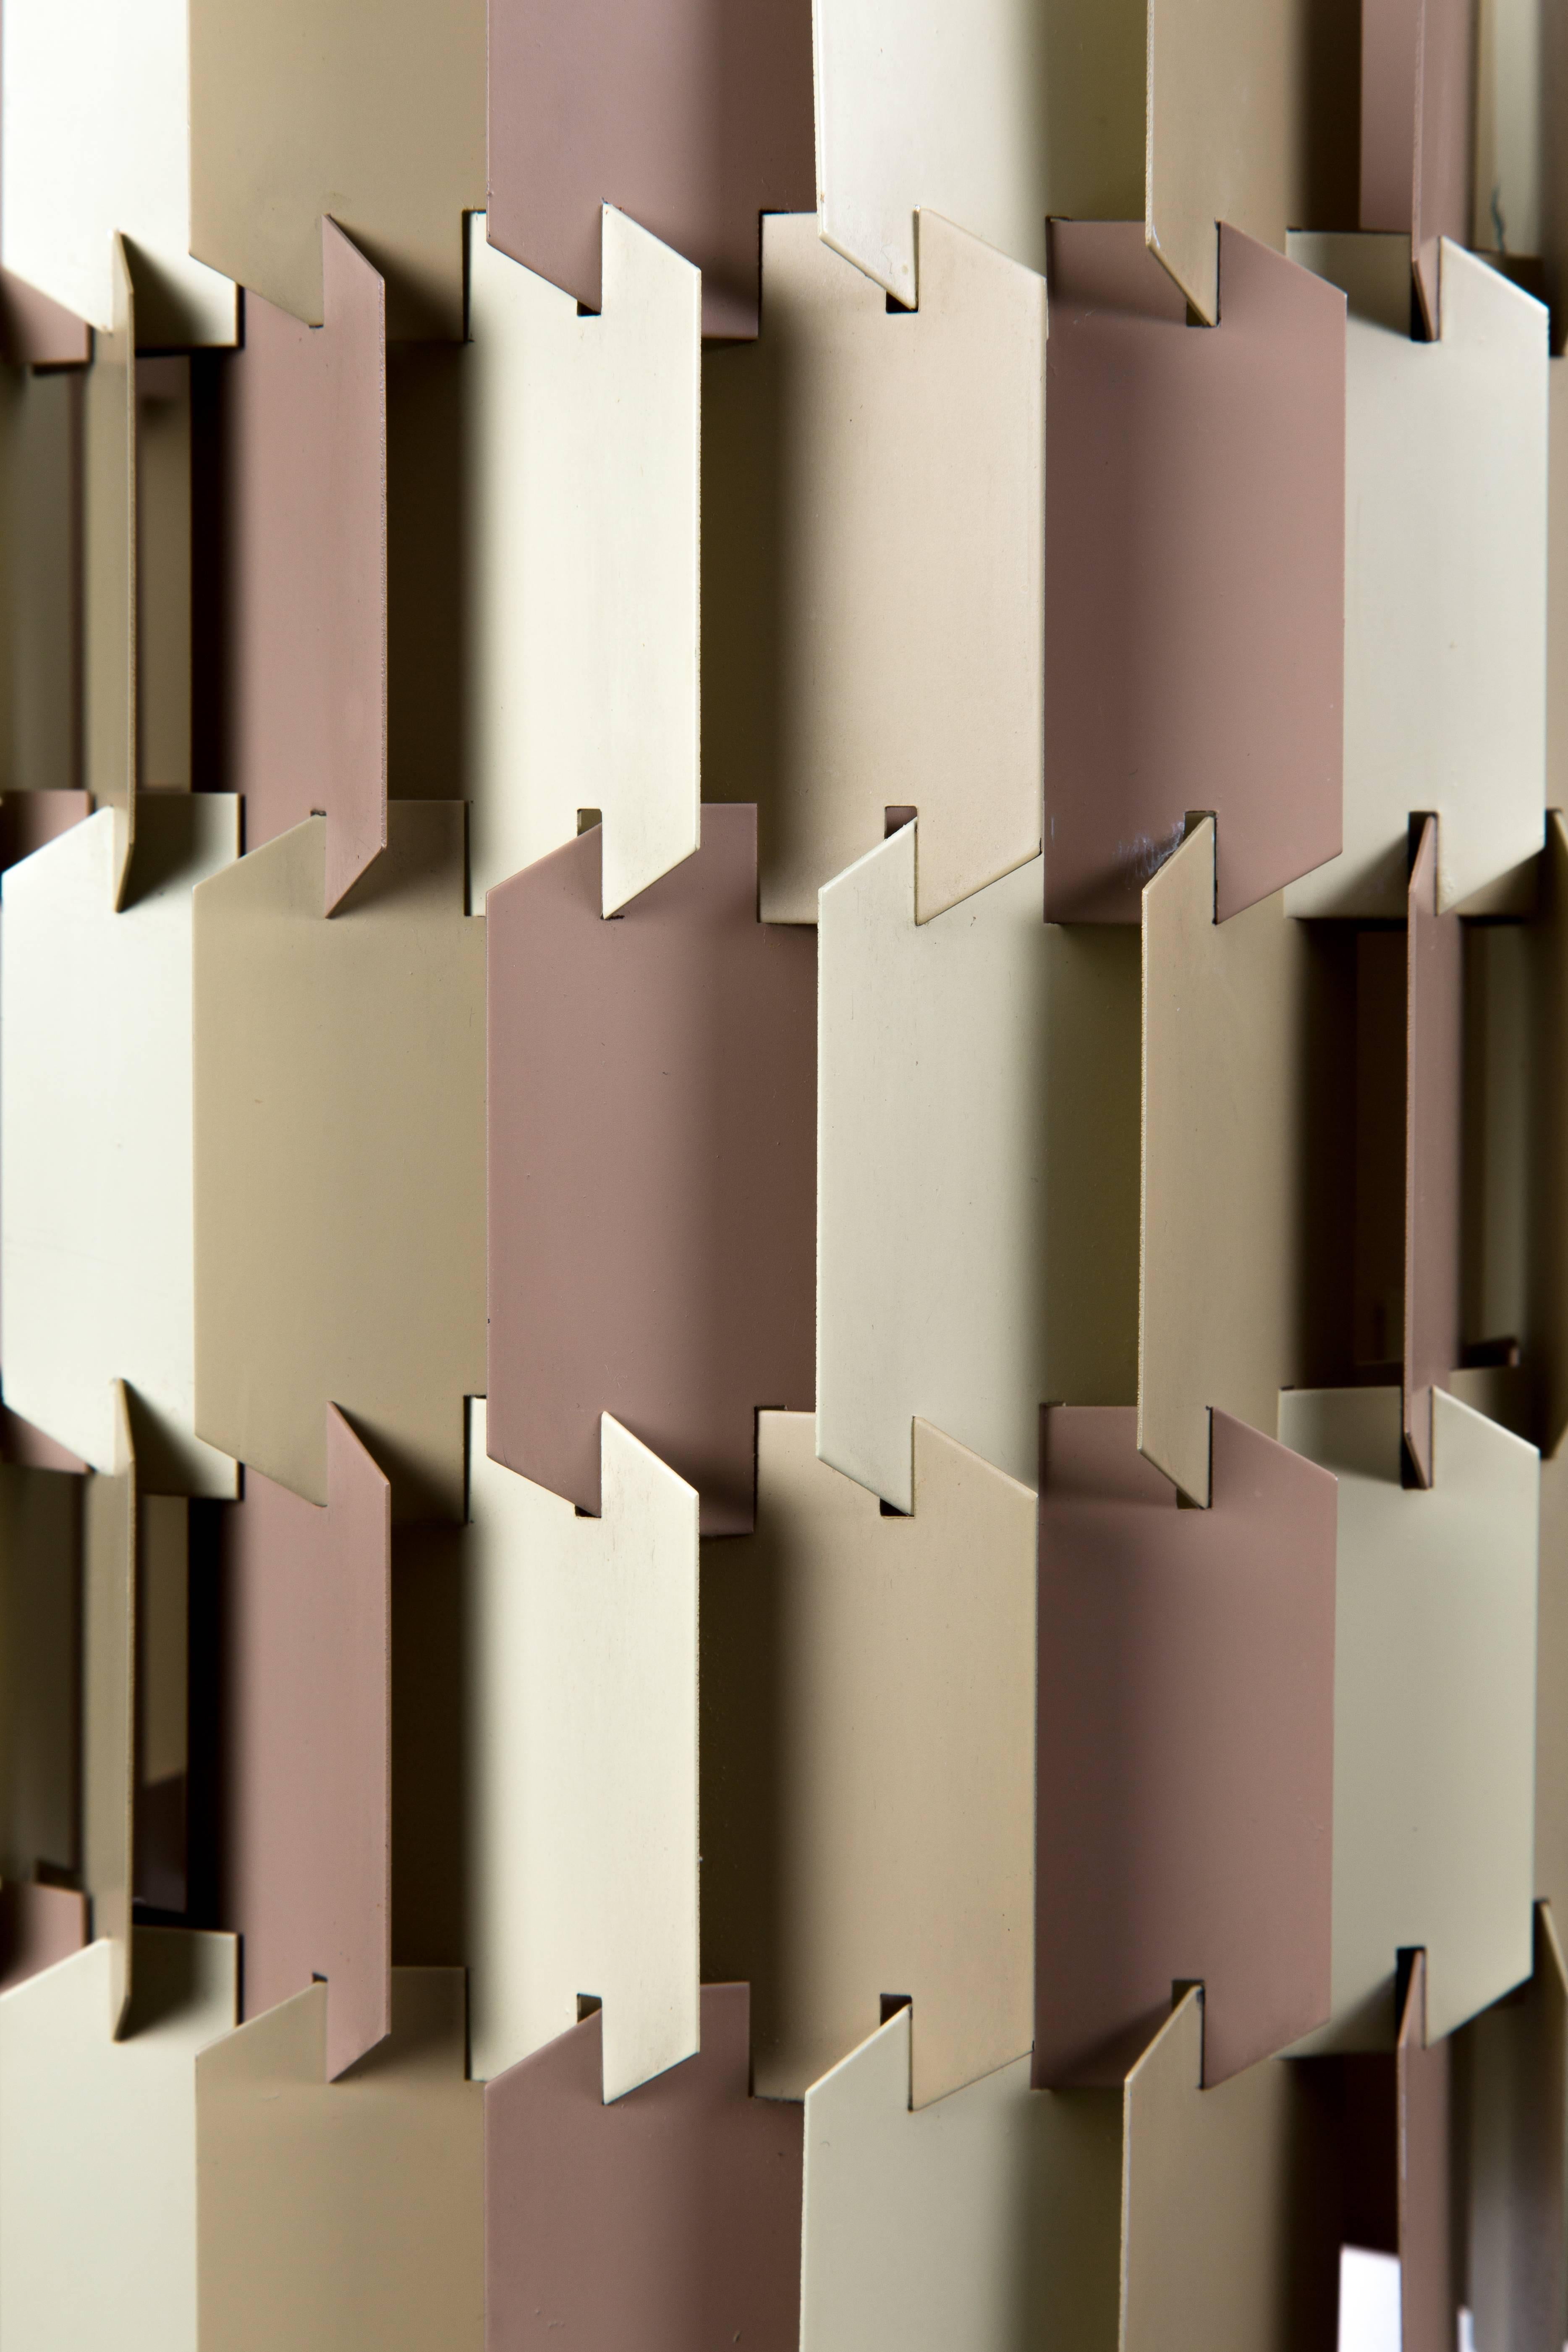 FACET POP. Facet Pop, Louis Weisdorf for Lyfa, Germany. Mathematic construction of metal sheets. Marvelous Idea. Very nice natural colors. Old pink, soft green and off-white.